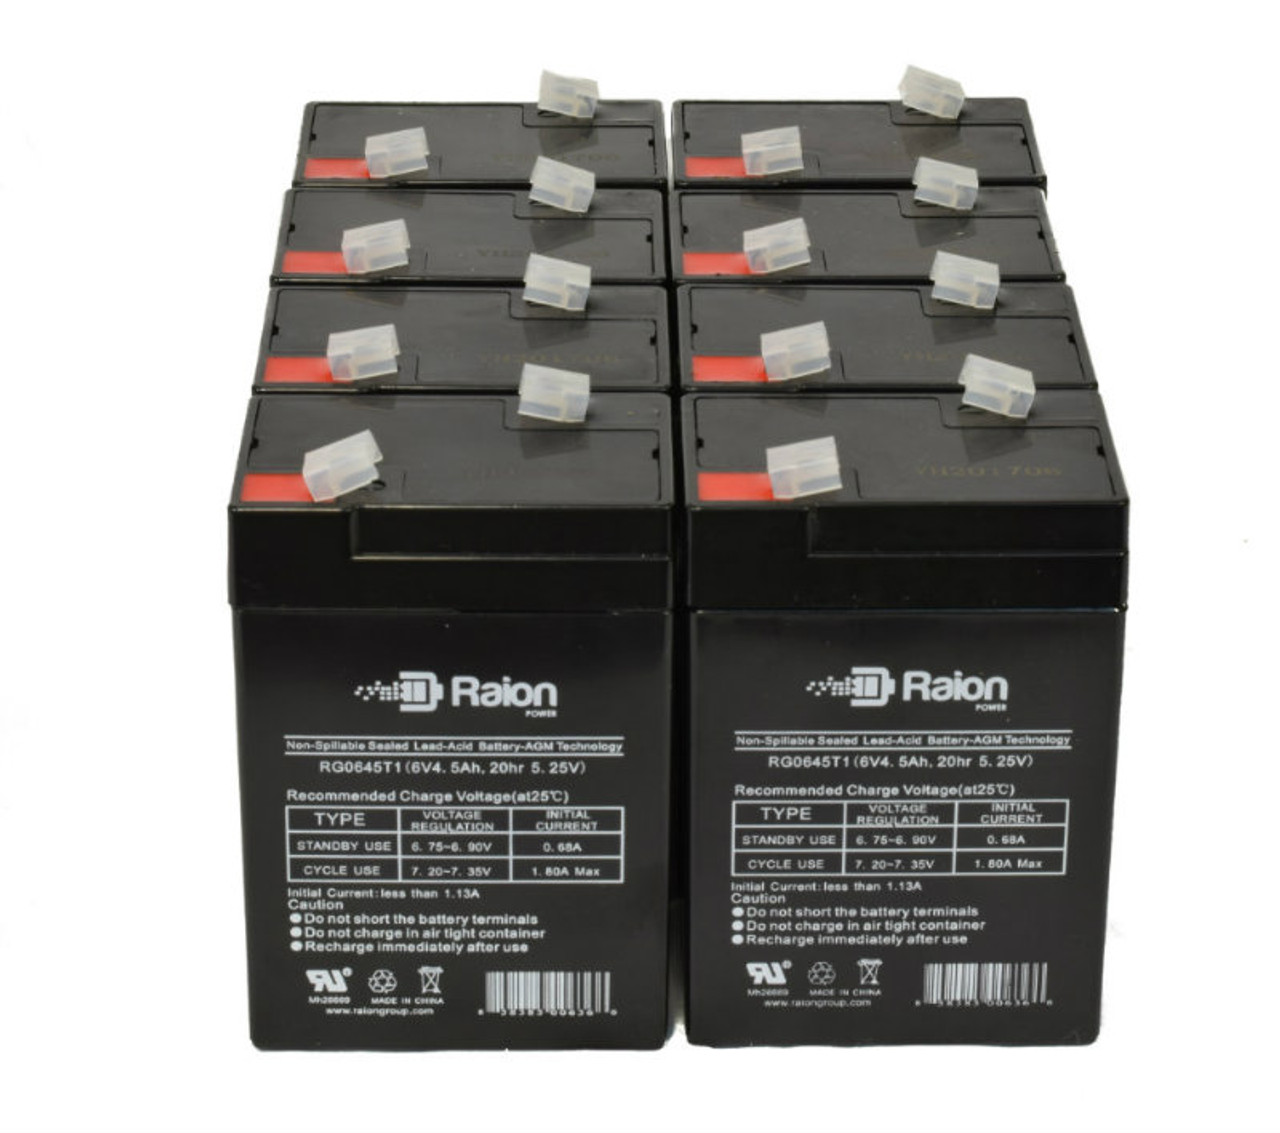 Raion Power RG0645T1 6V 4.5Ah Replacement Medical Equipment Battery for Nellcor NPB 390 - 8 Pack